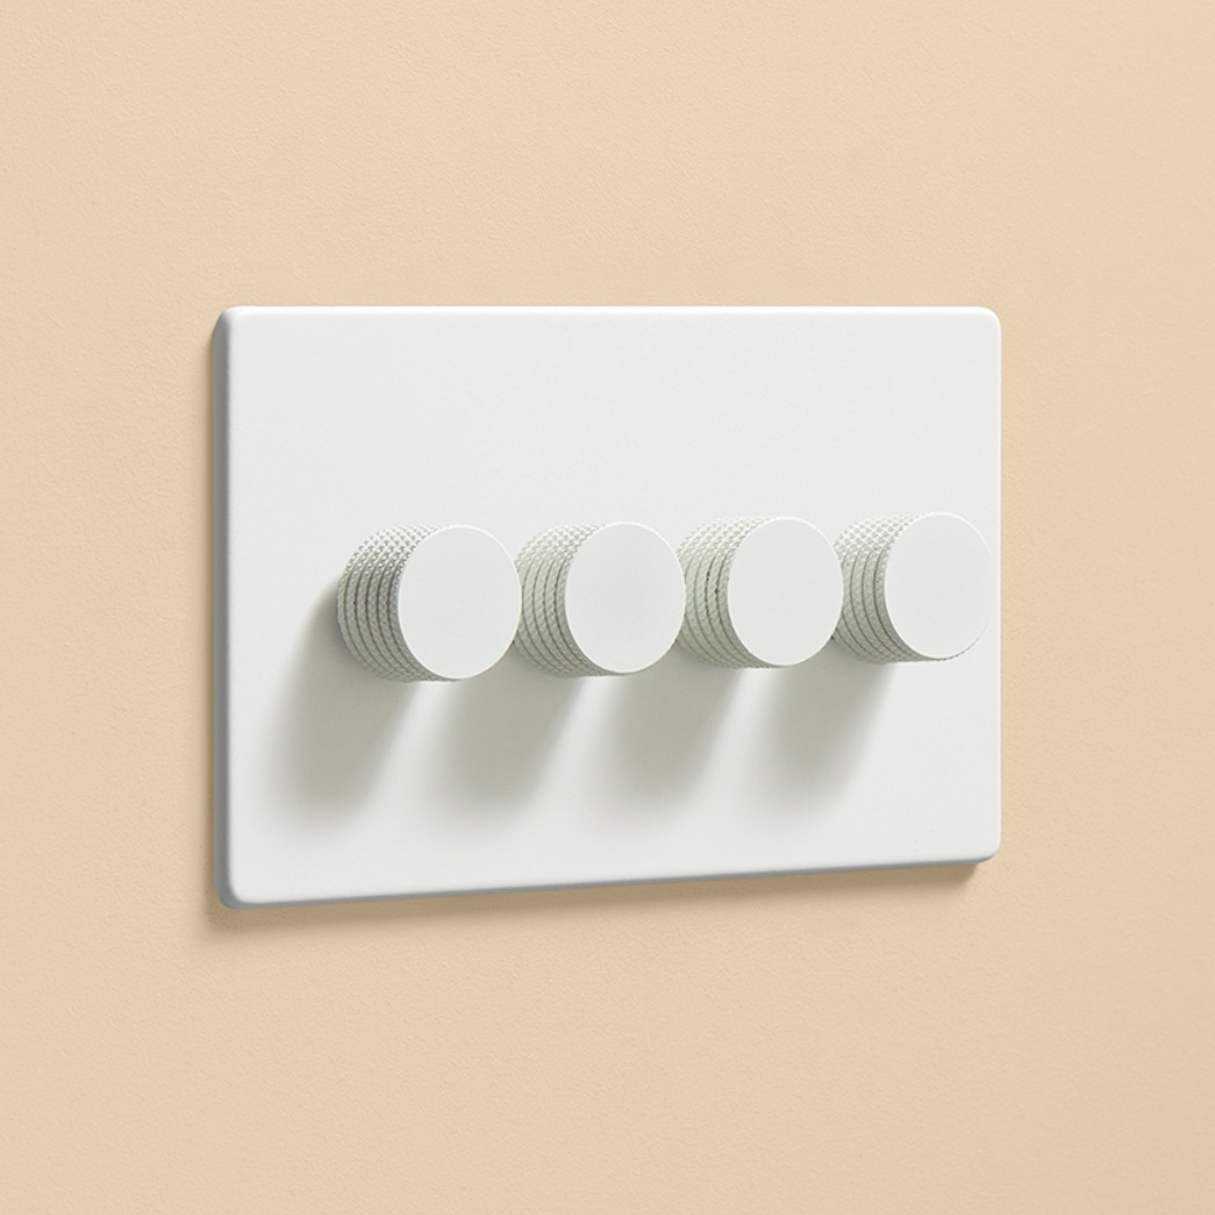 What Kind Of Dimmer Switch Do I Need